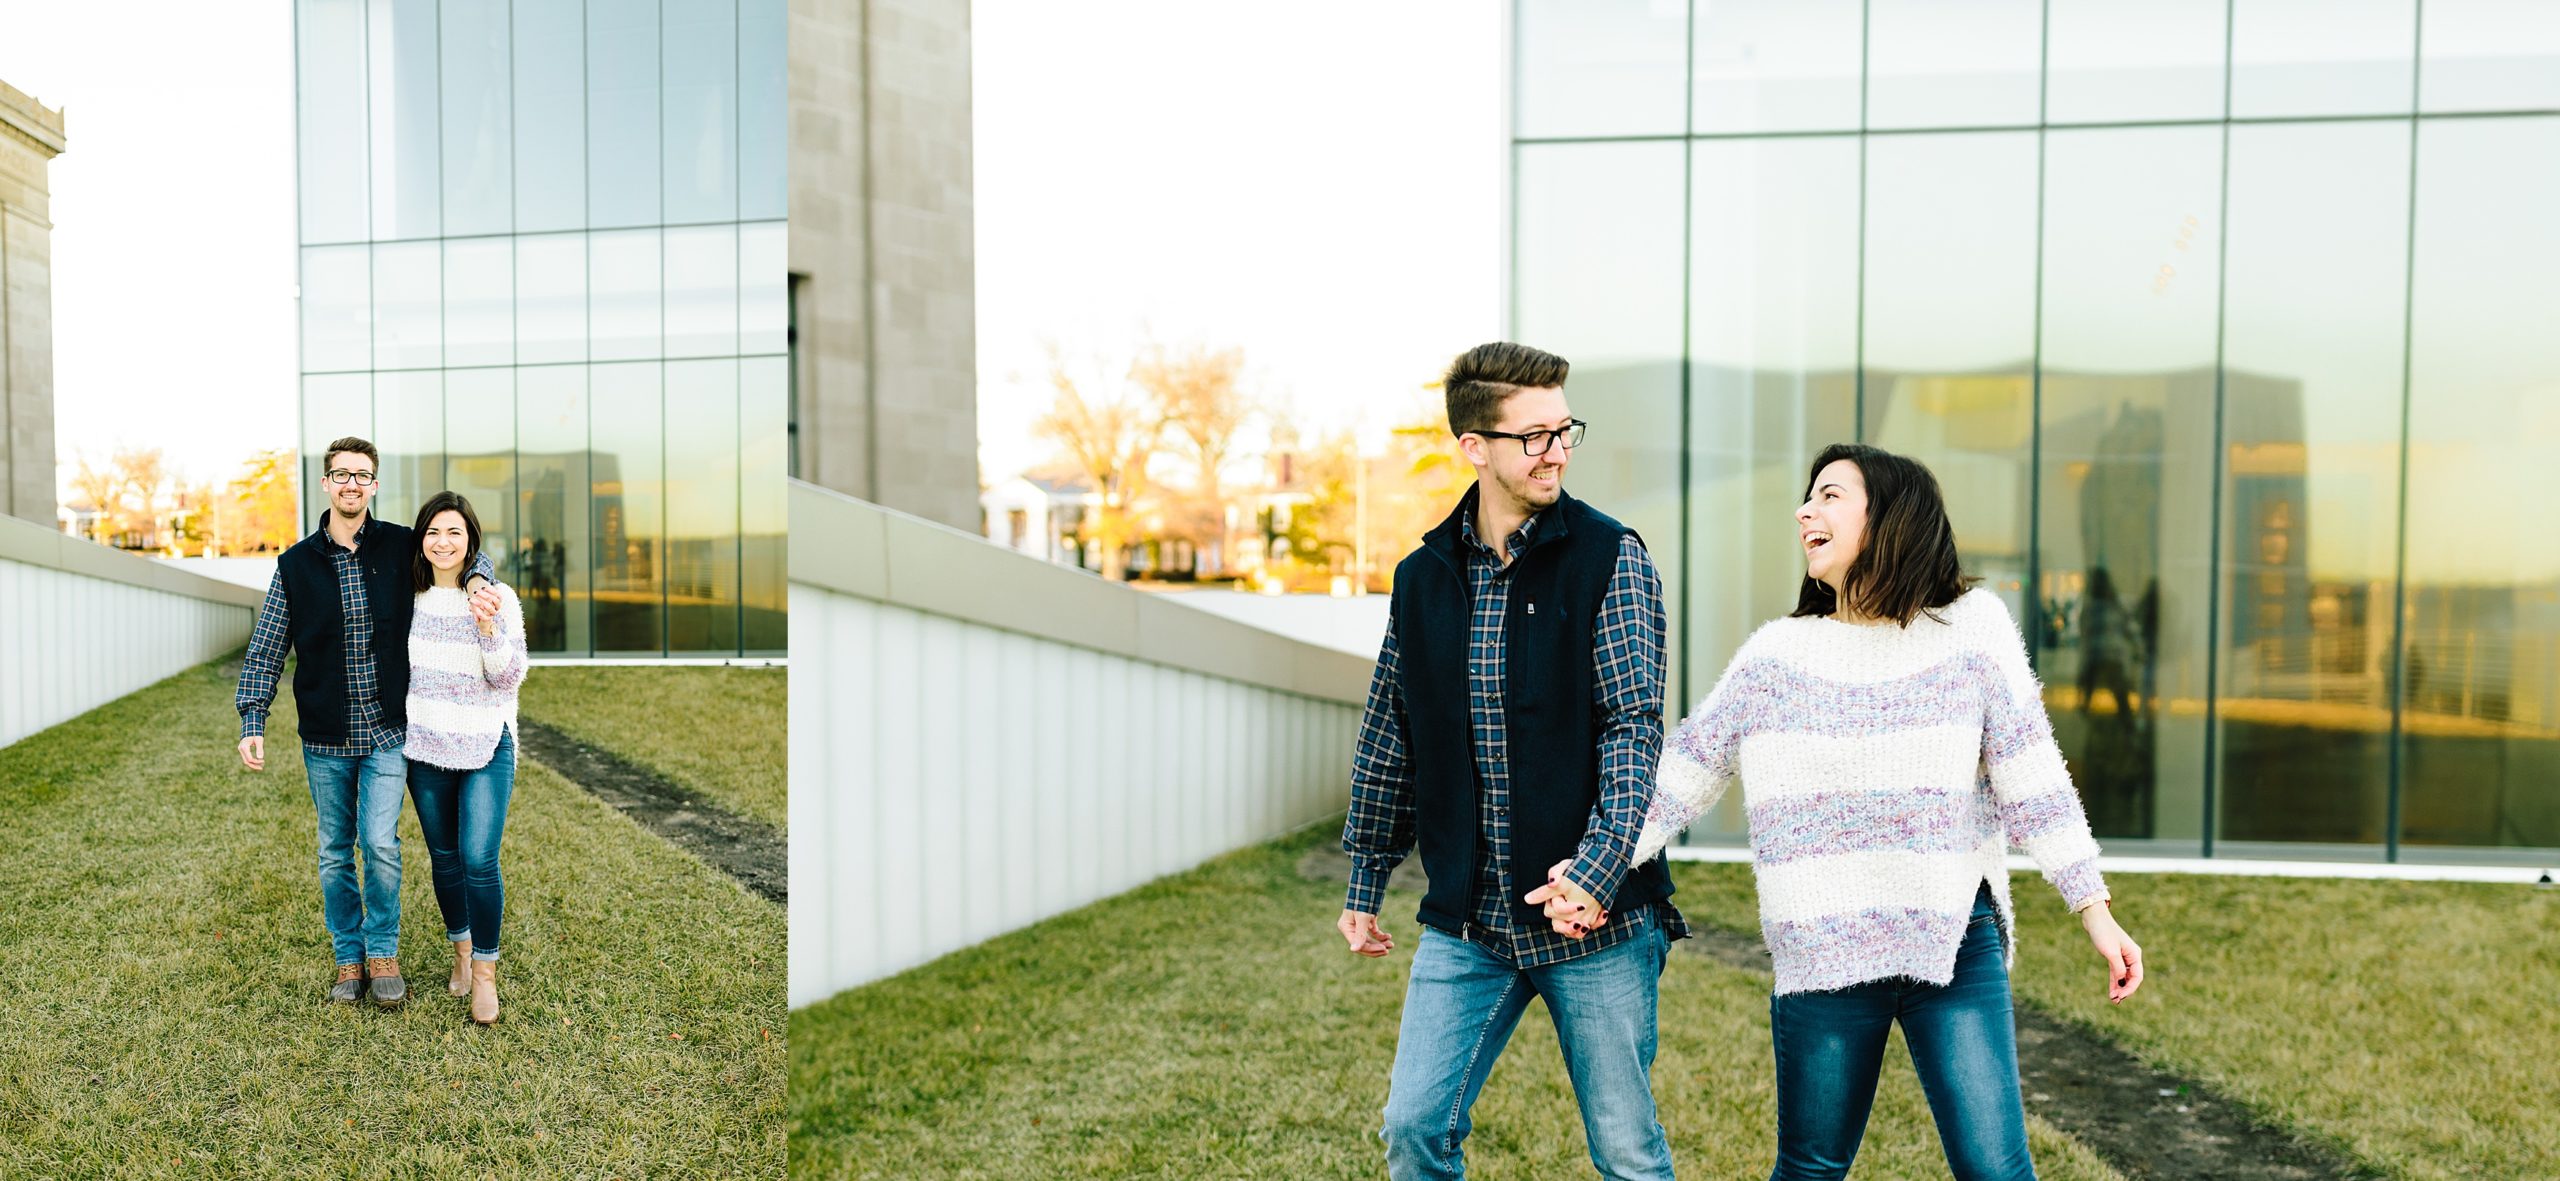 Engagement Session Locations In Kansas City